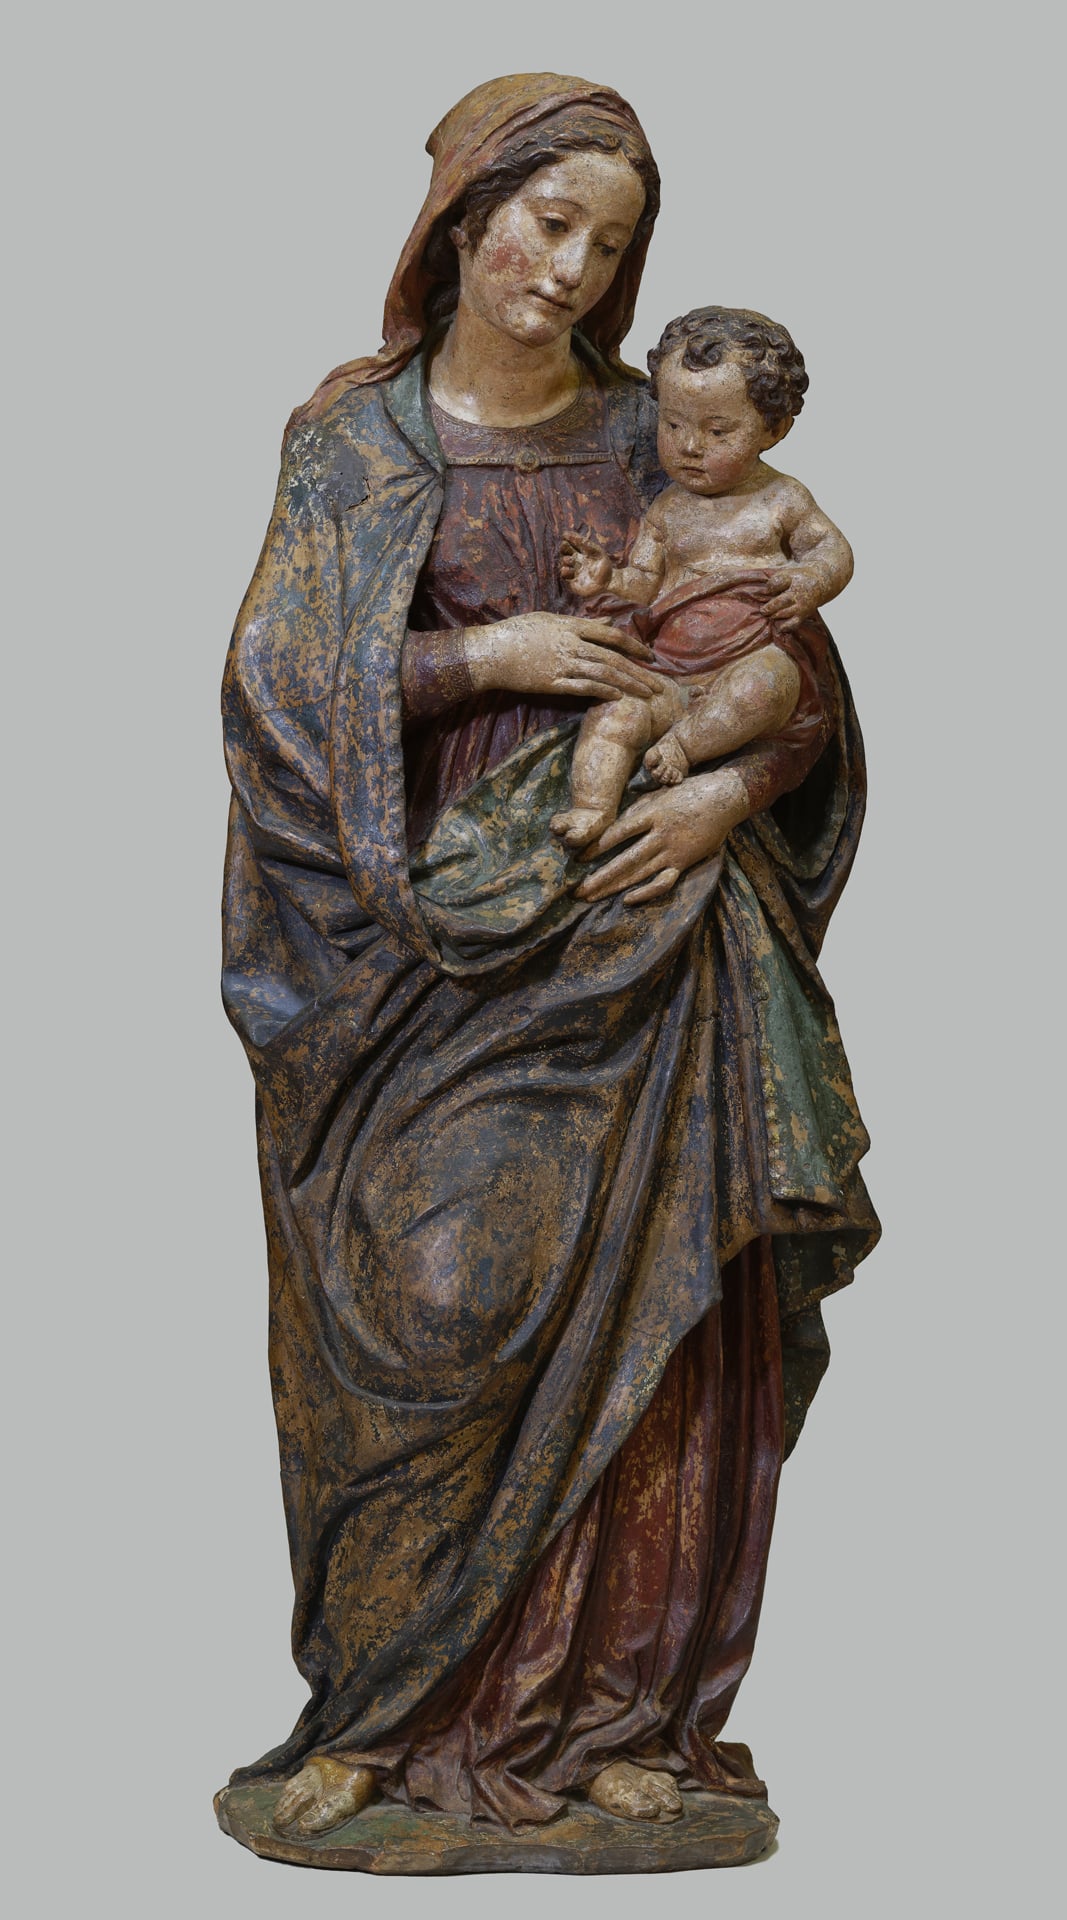 a terracotta statue of the madonna holding the christ child. the paint is worn; she wears a blue robe over a red dress.